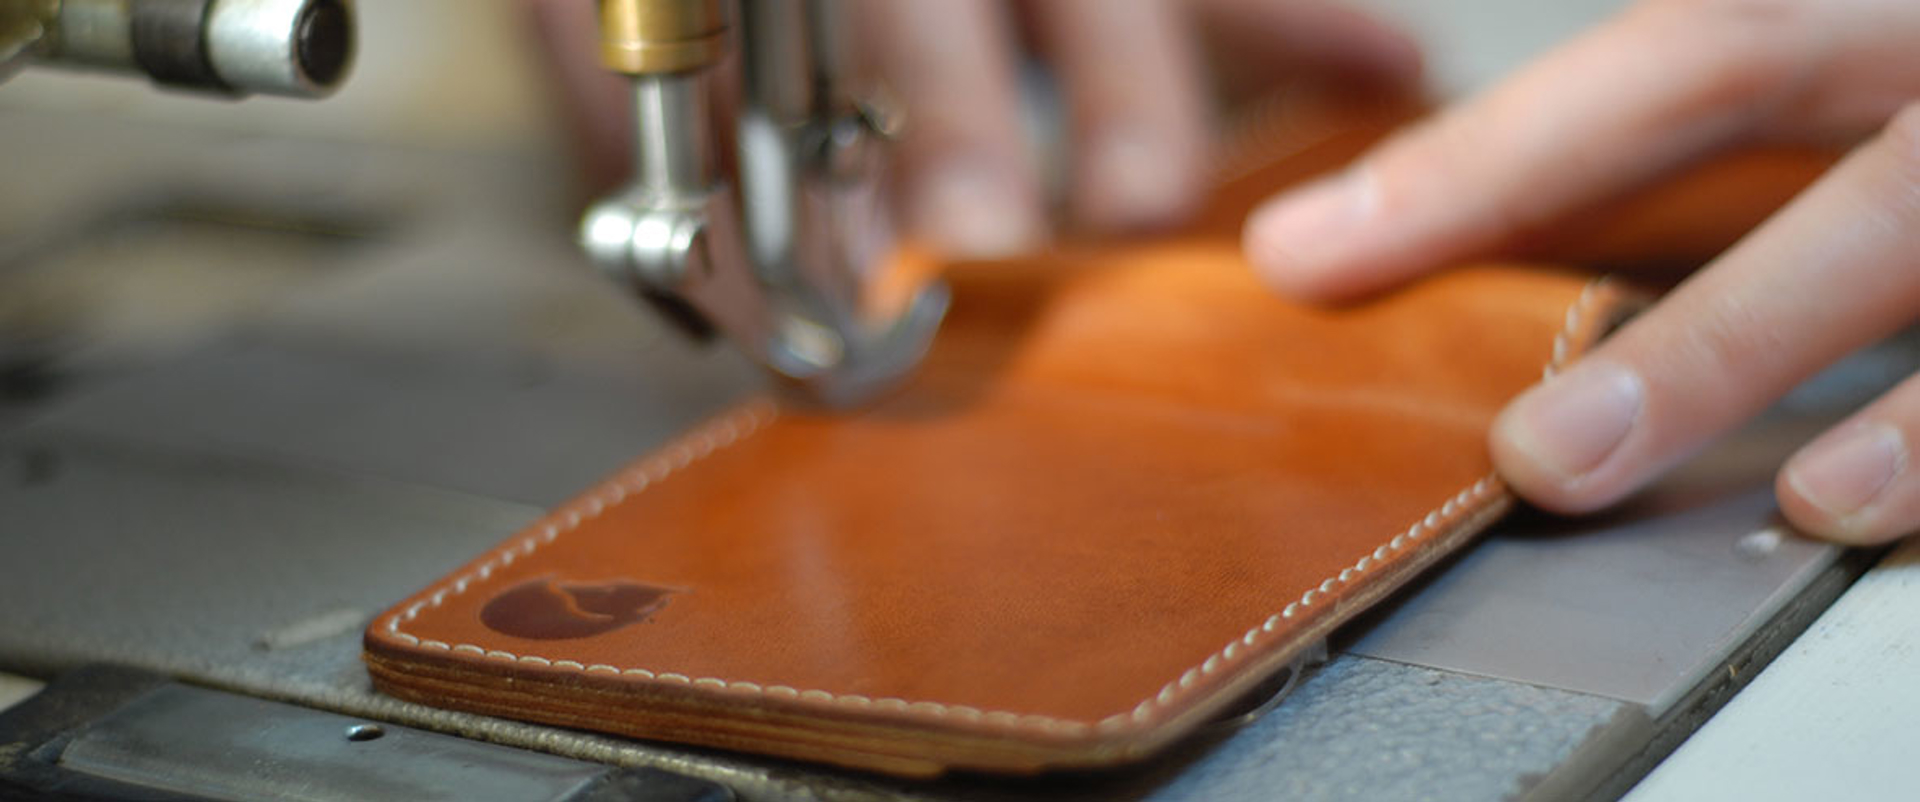 Leather watch being stitched